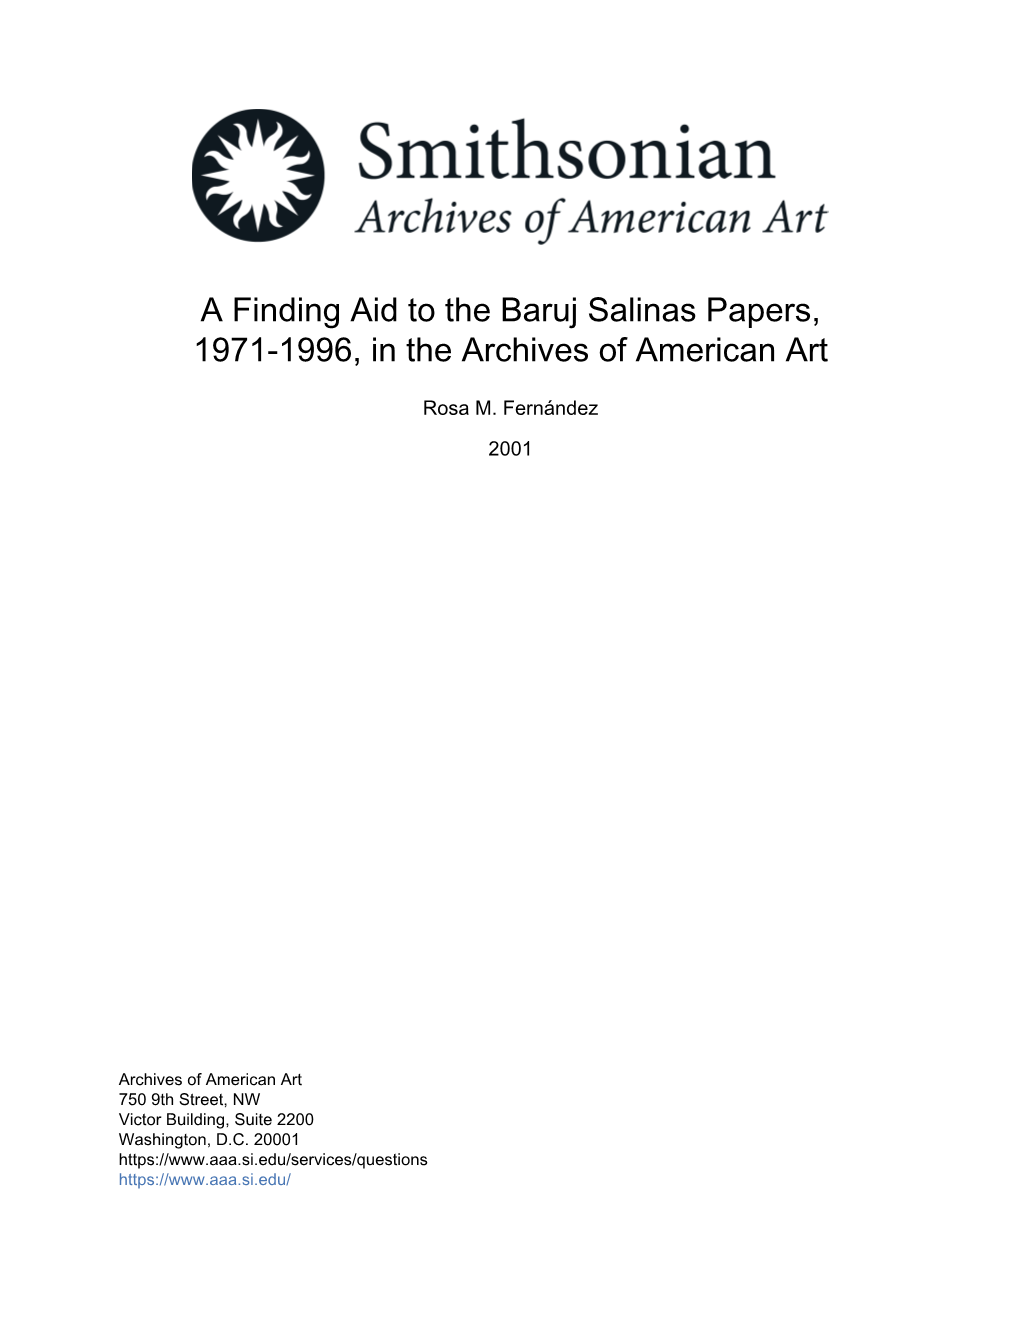 A Finding Aid to the Baruj Salinas Papers, 1971-1996, in the Archives of American Art